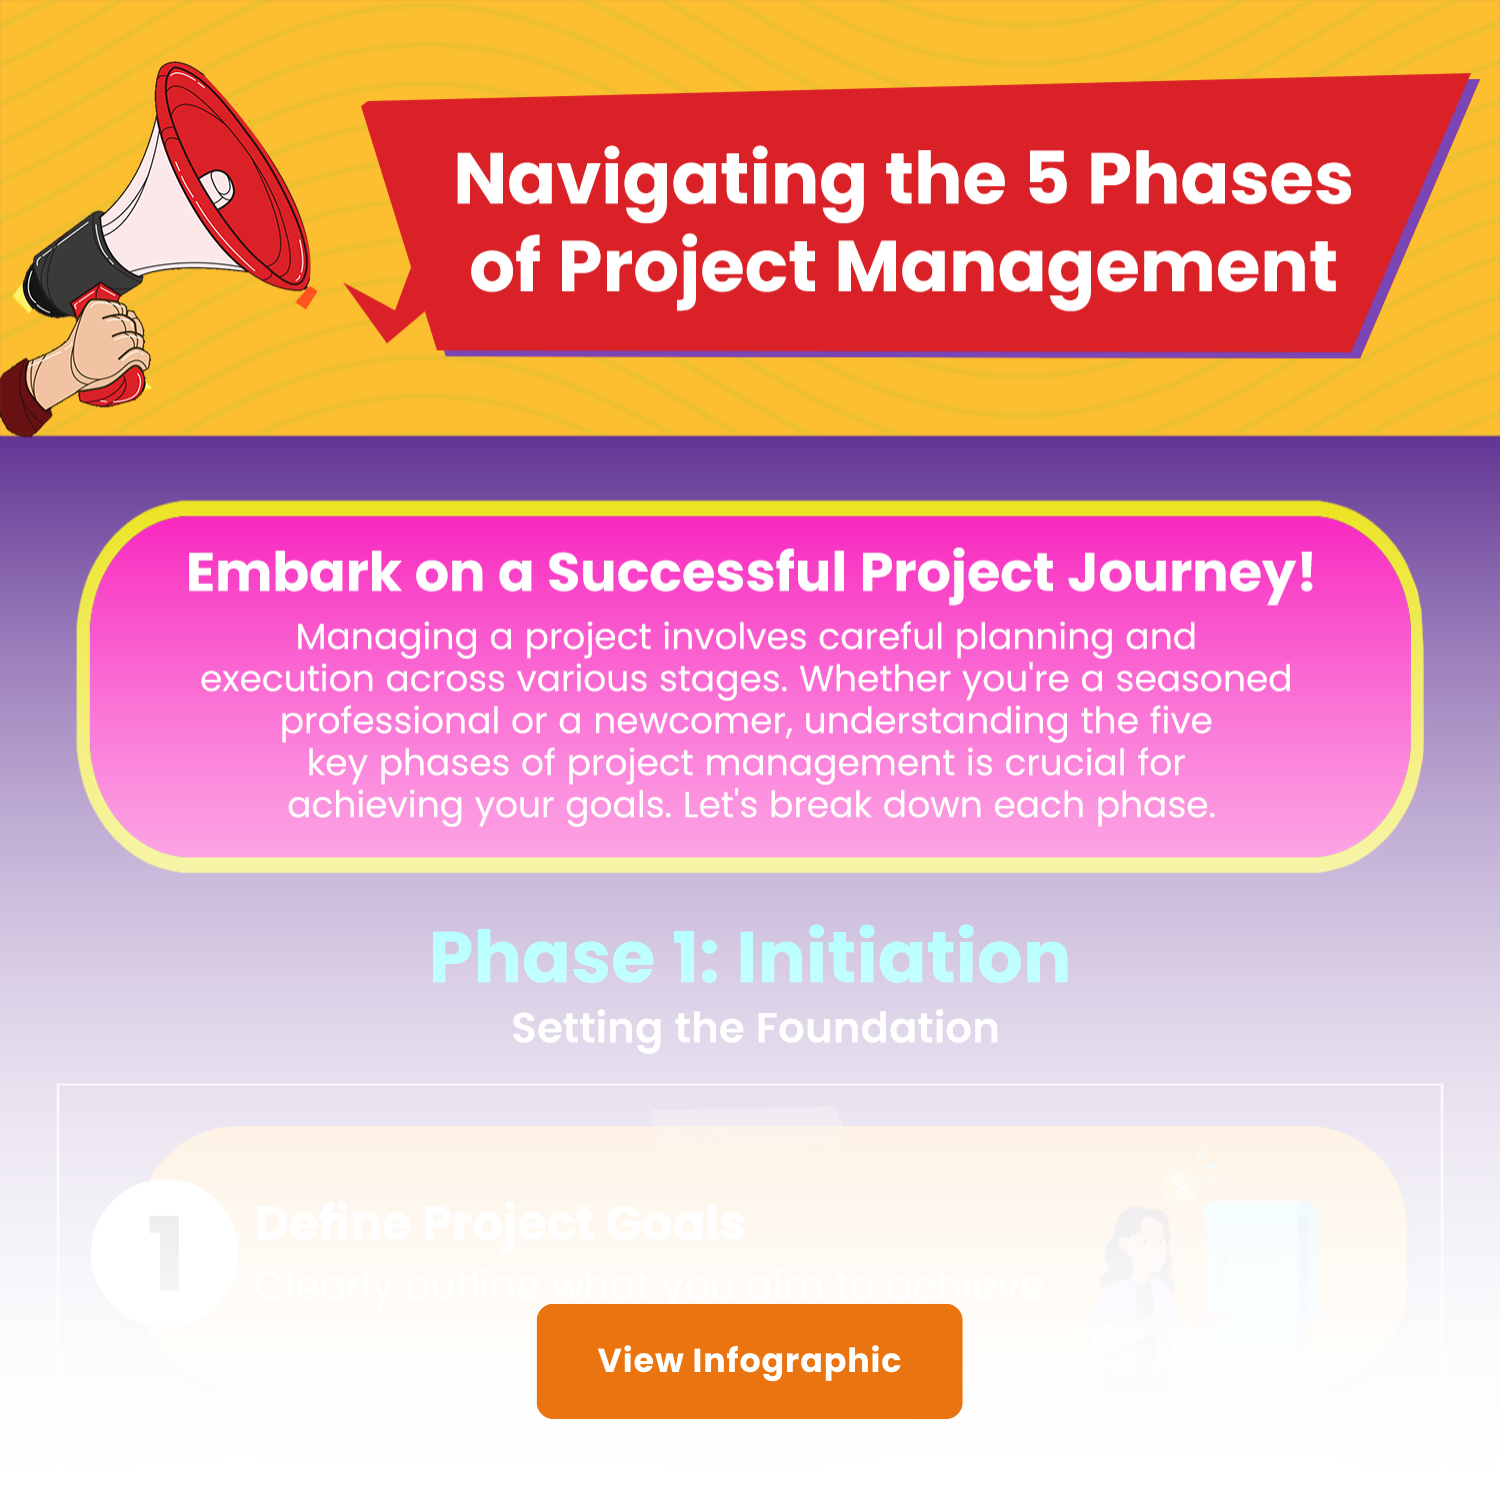 phases of project management infographic